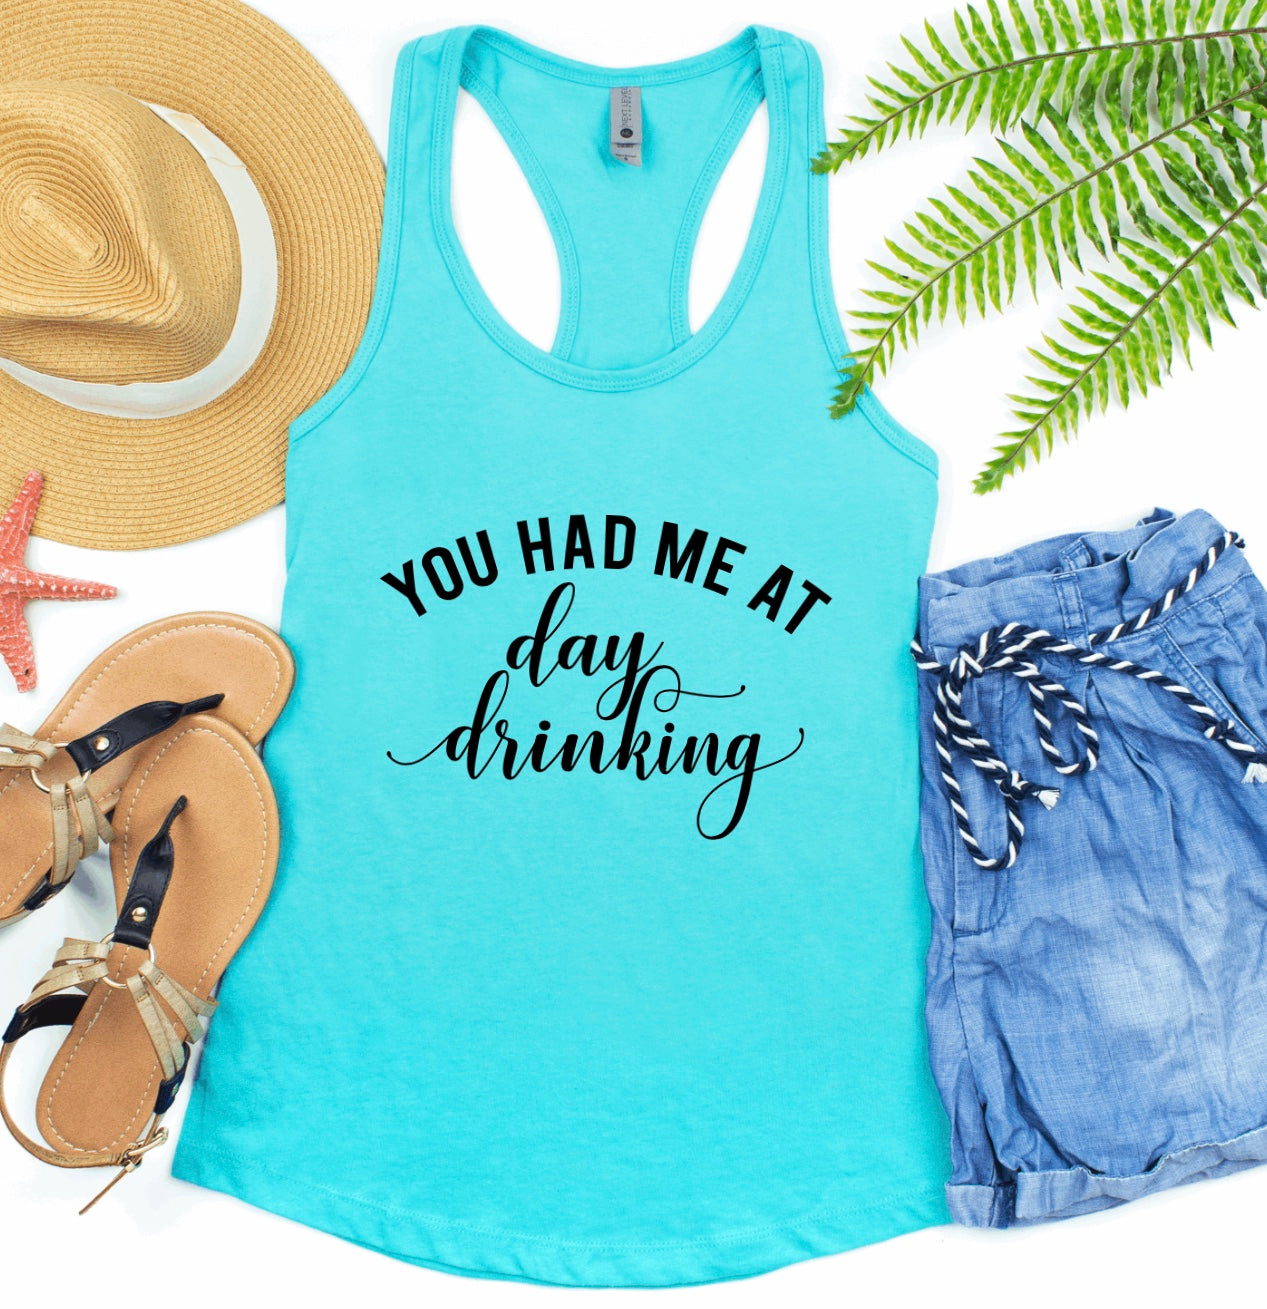 You had me at day drinking racerback tank top